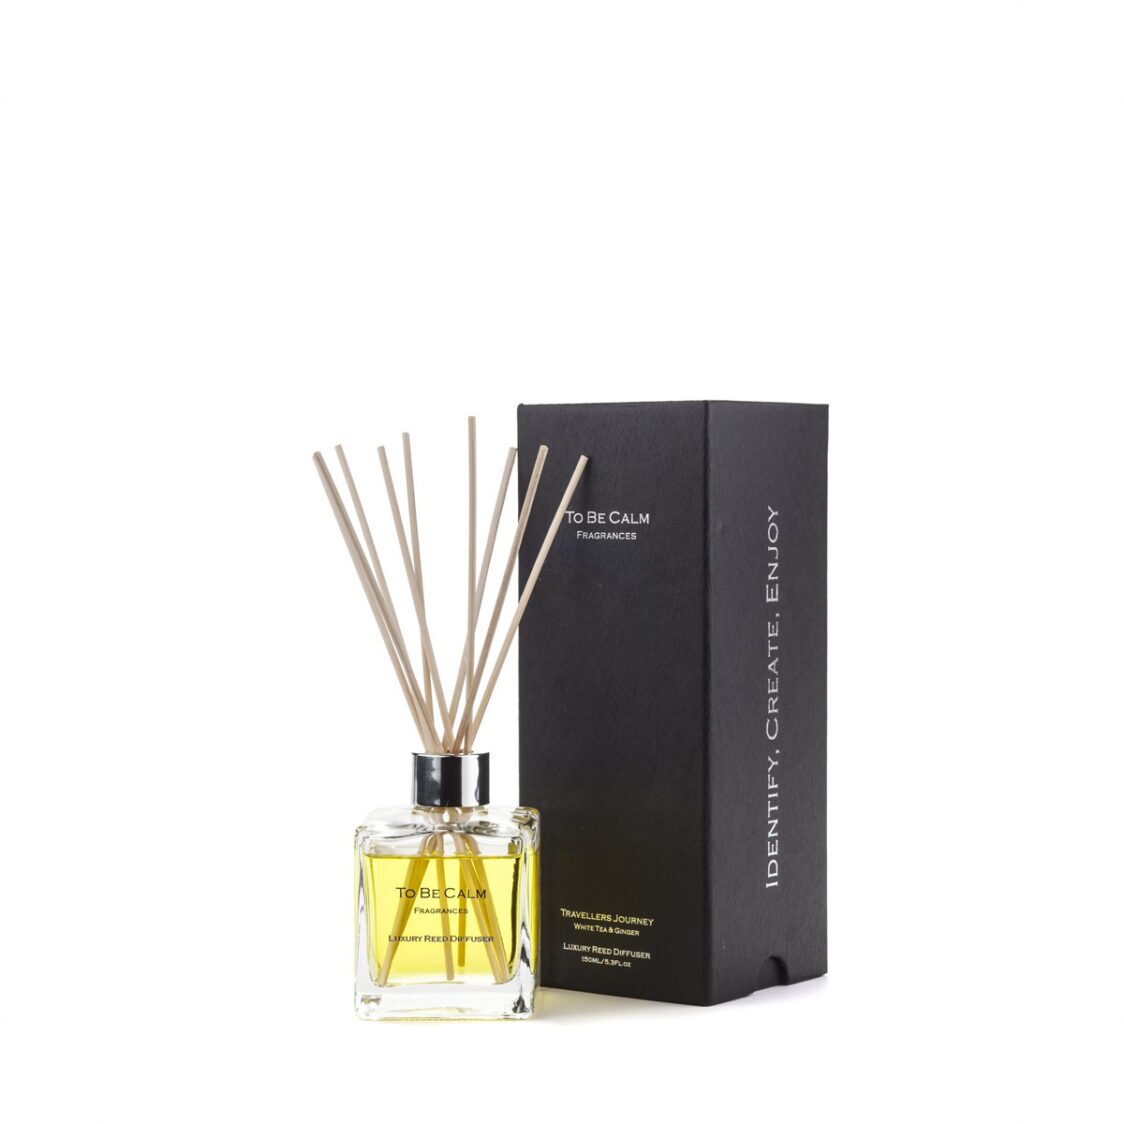 To Be Calm Travelers Journey - White Tea Ginger - Reed Diffuser 150ml